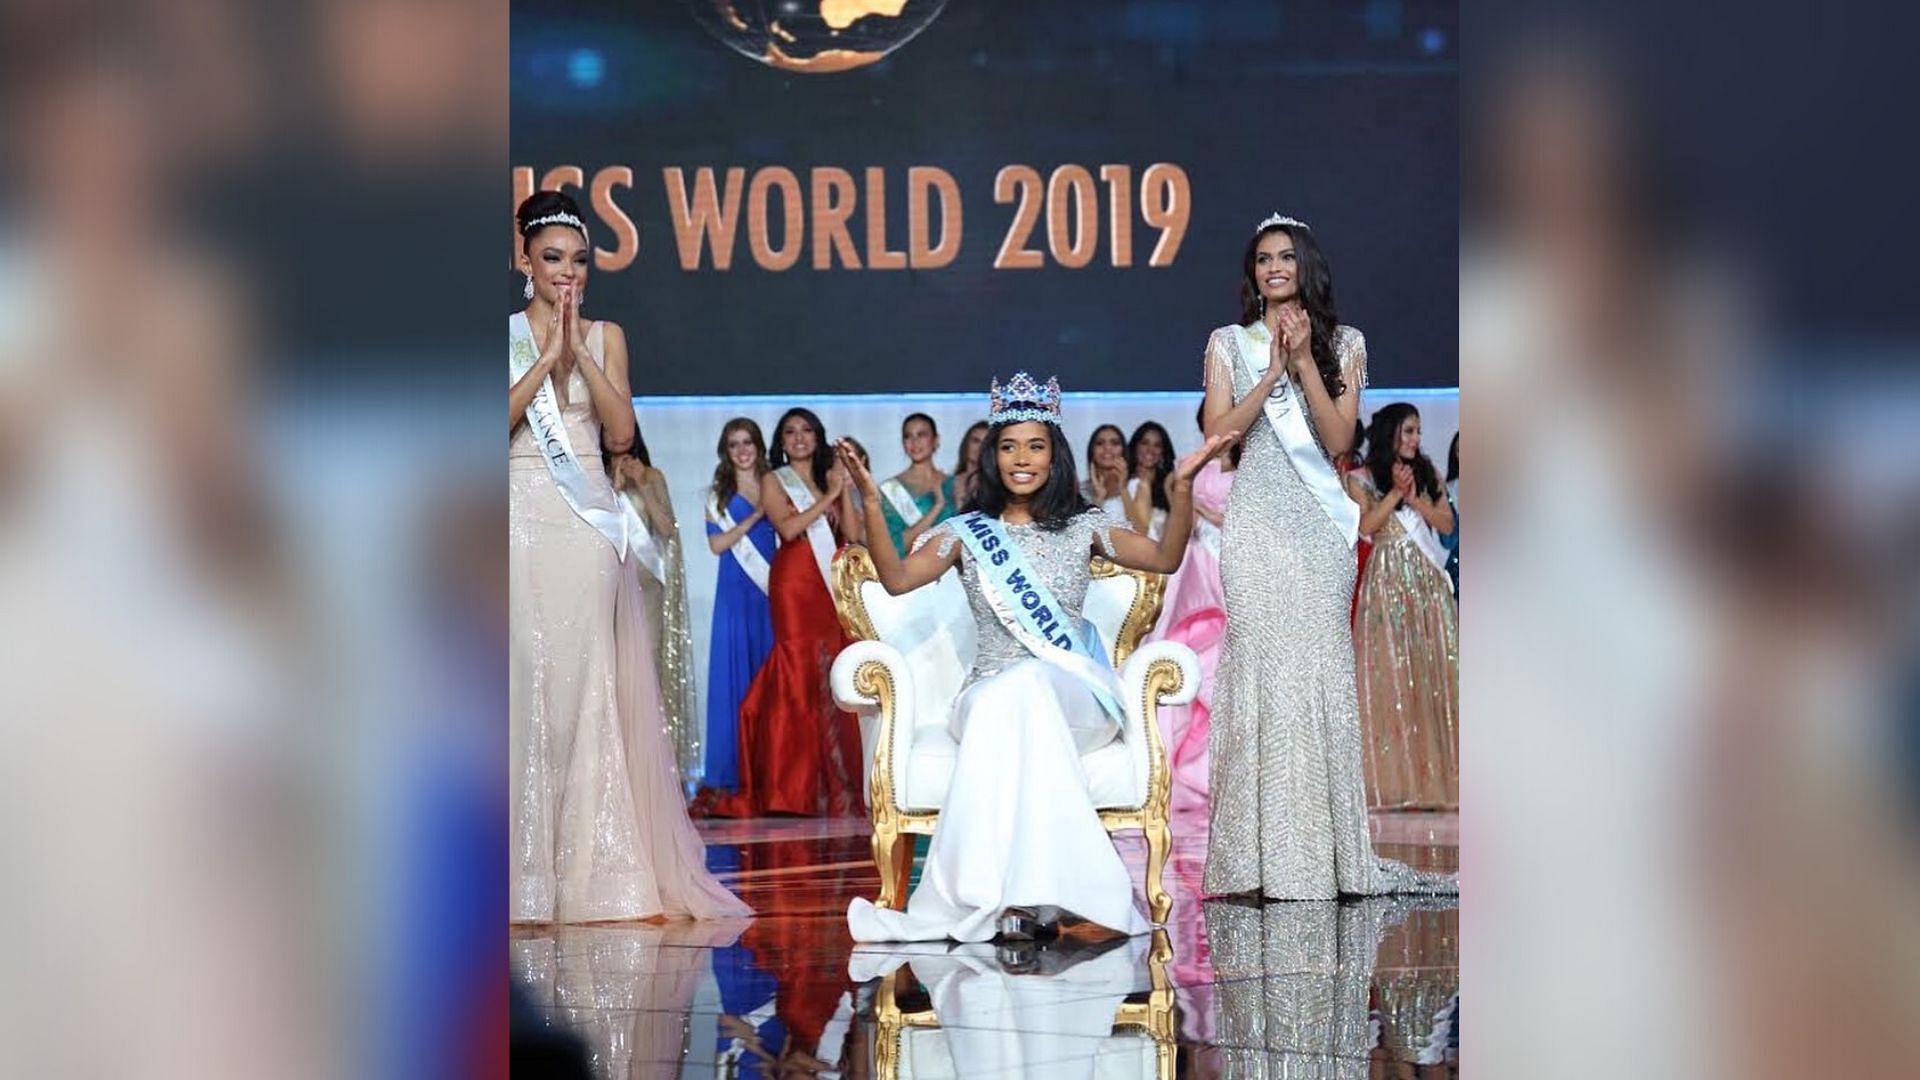 Miss Jamaica Toni Ann-Singh was crowned the Miss World 2019. Ophely Mezino of France and Suman Rao of India were the first and second runners.&nbsp;